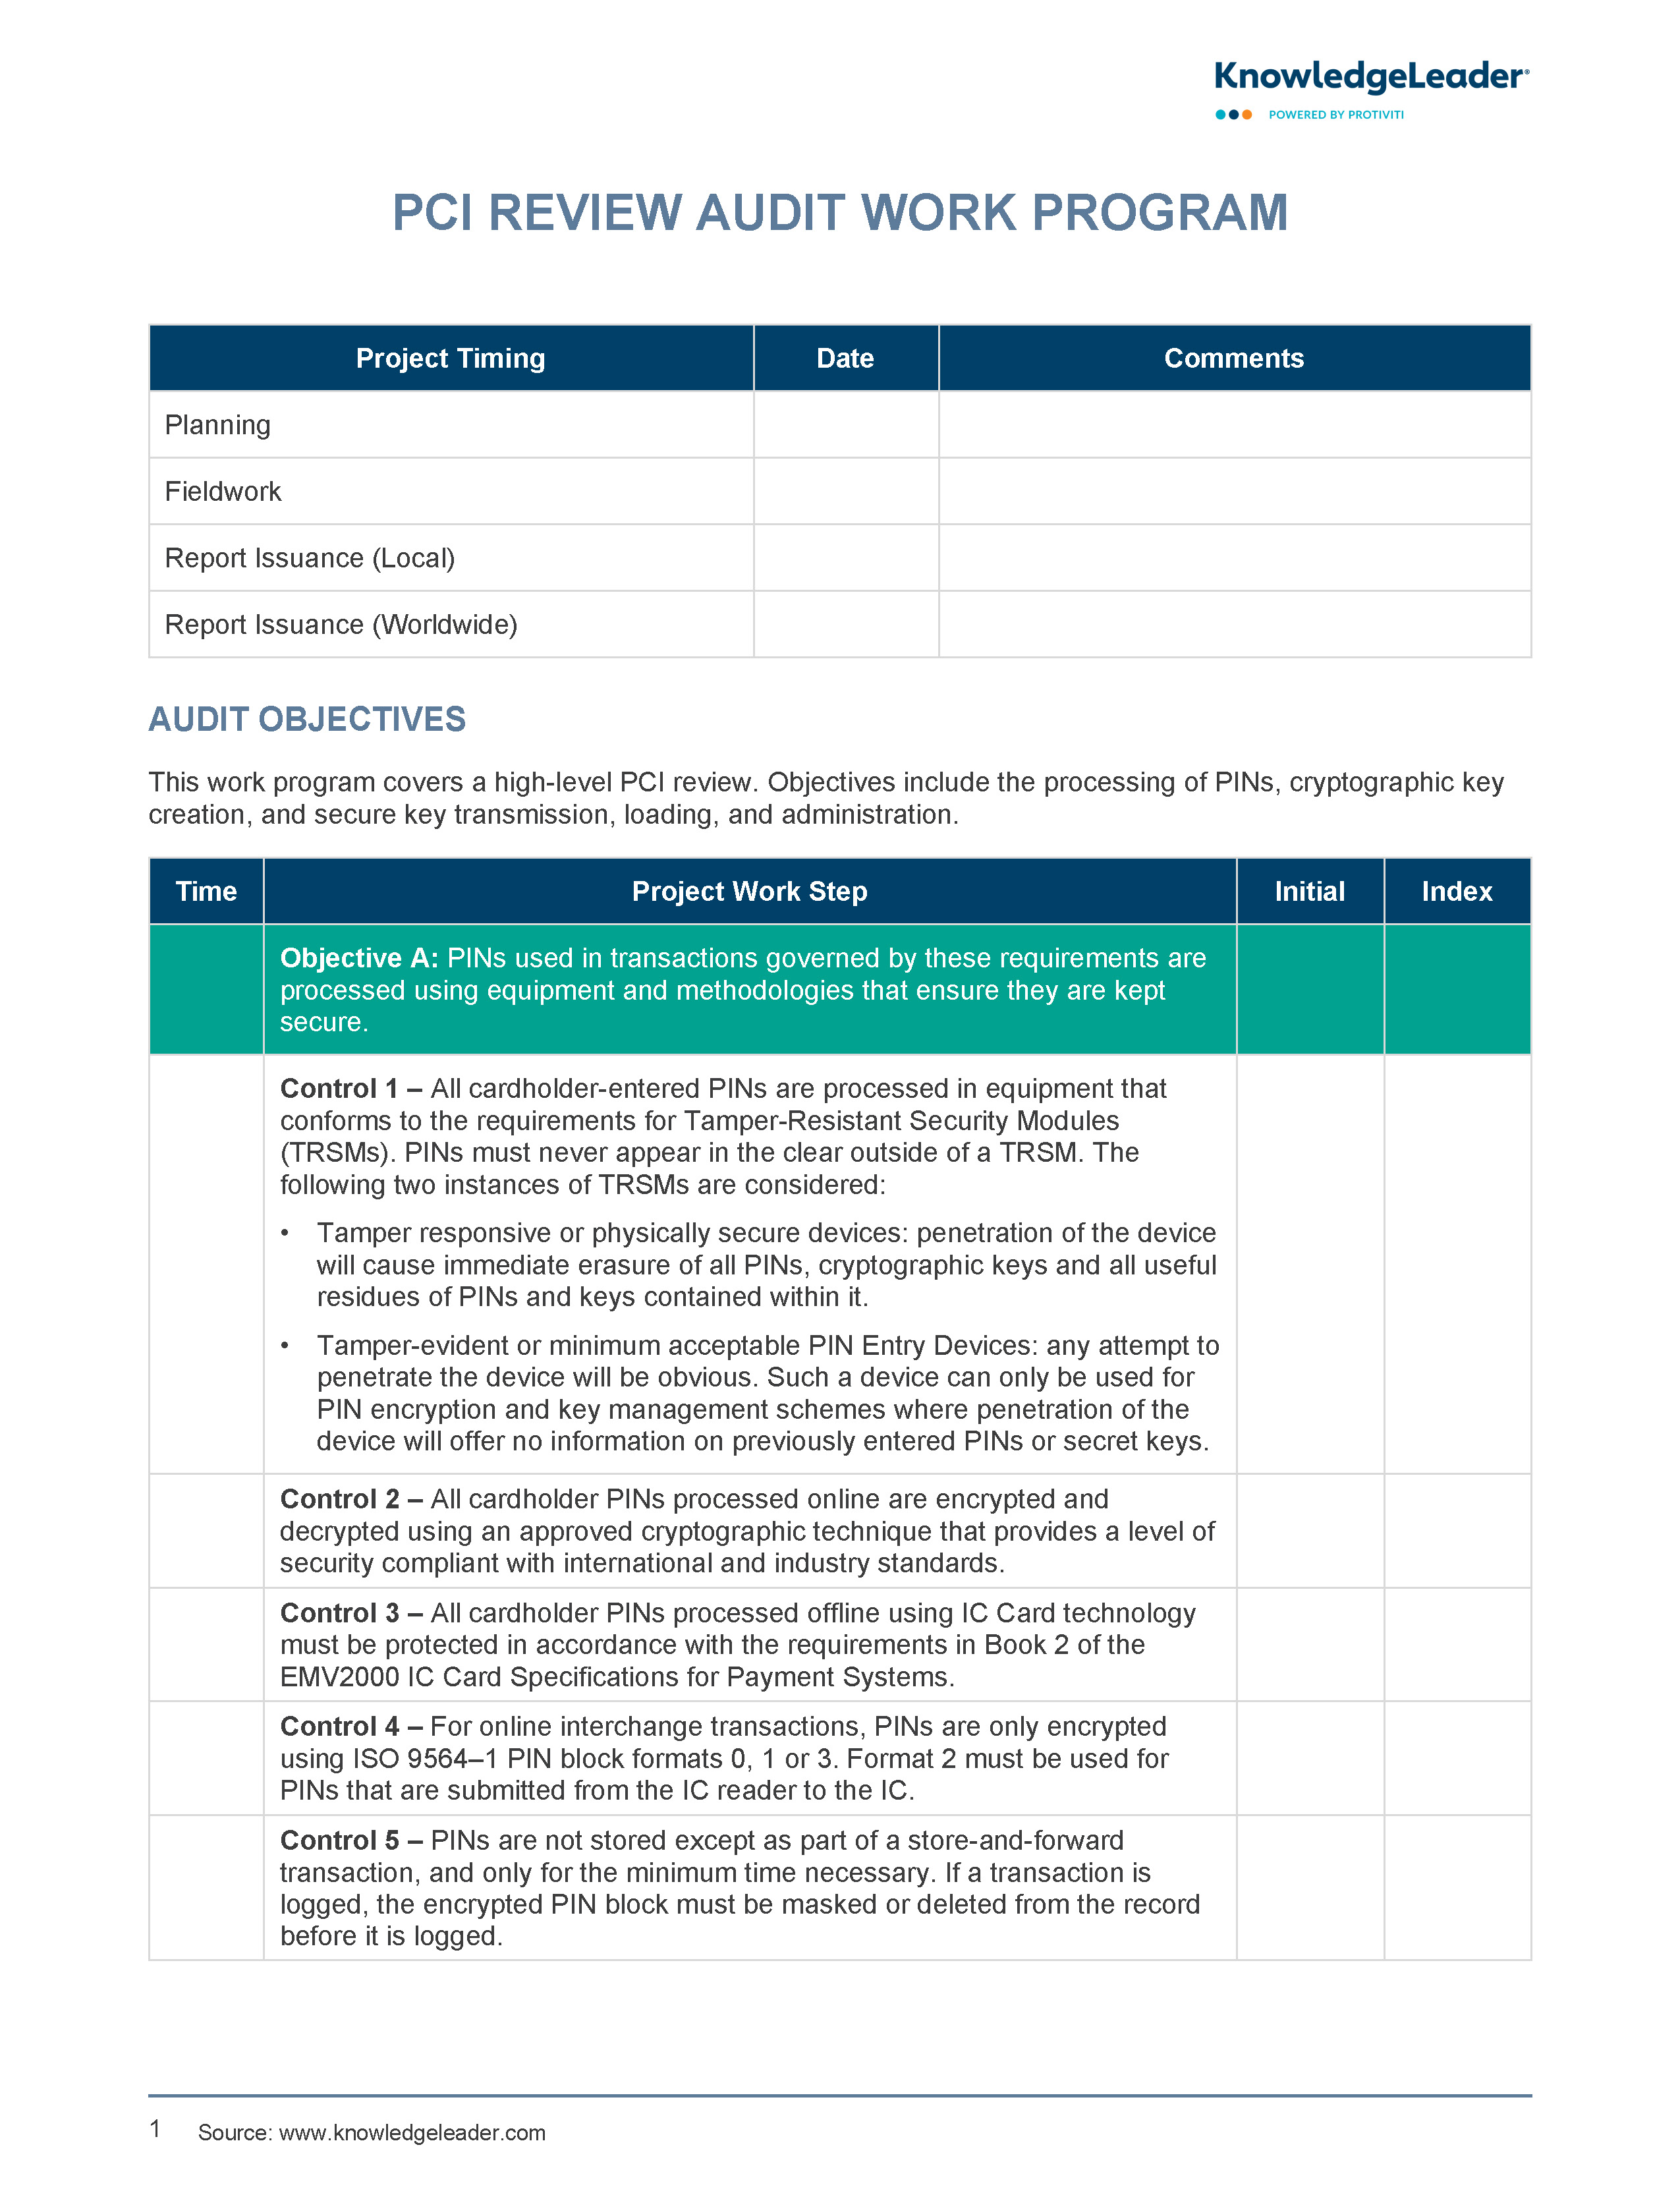 Screenshot of the first page of PCI Review Work Program